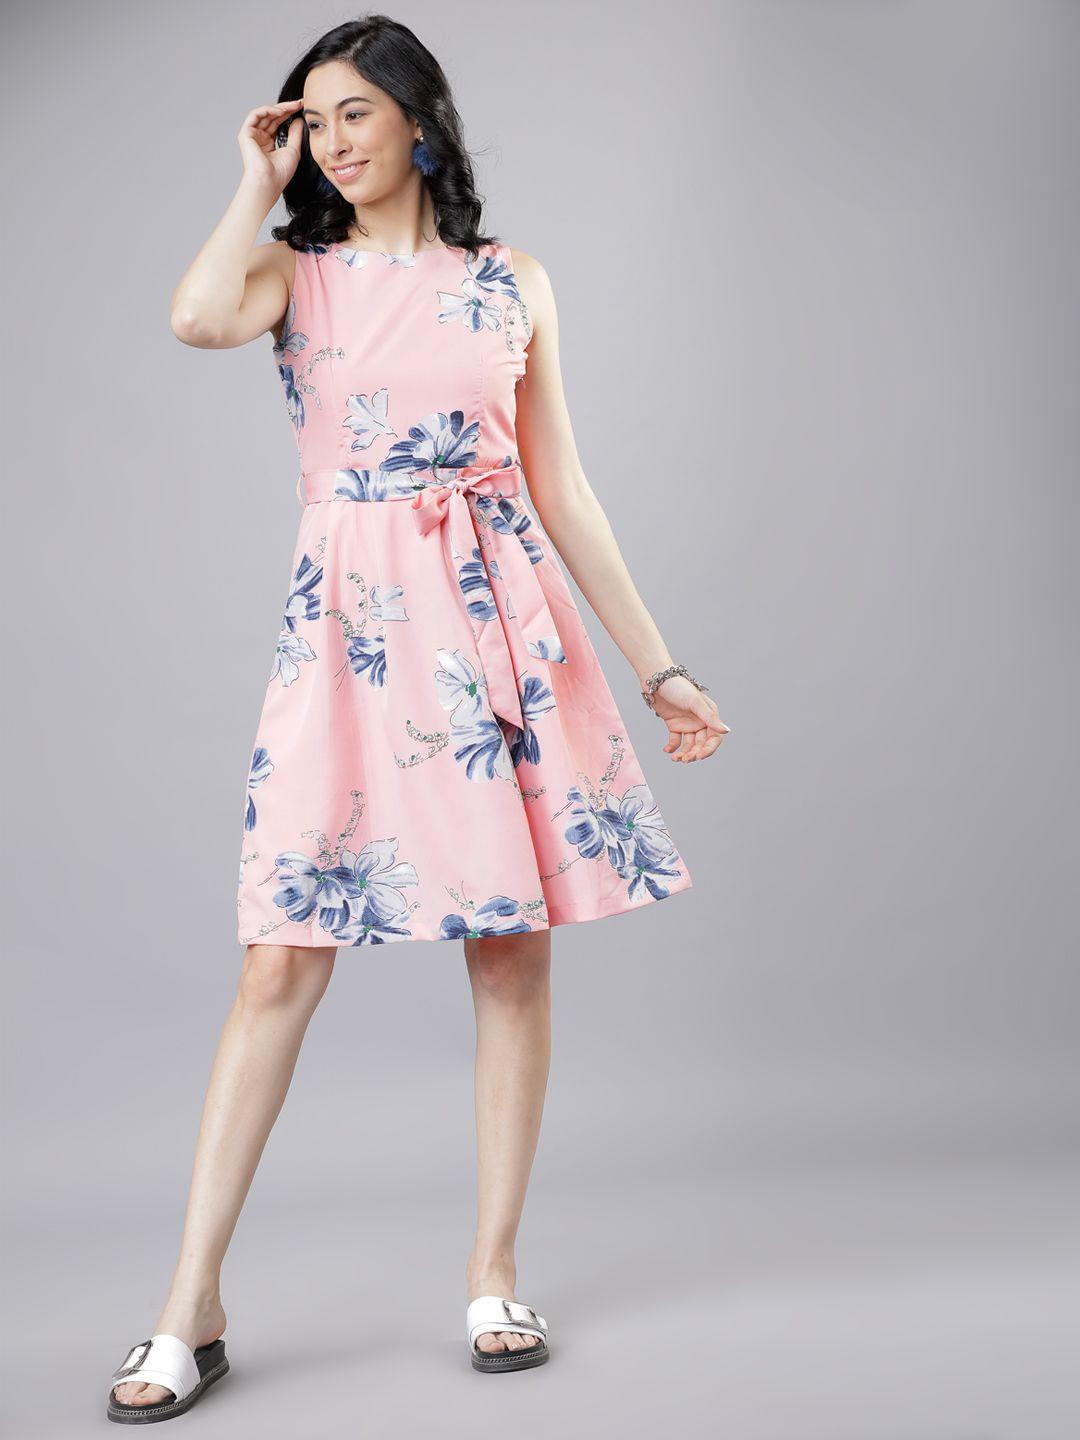 tokyo talkies women pink & blue floral print fit and flare dress